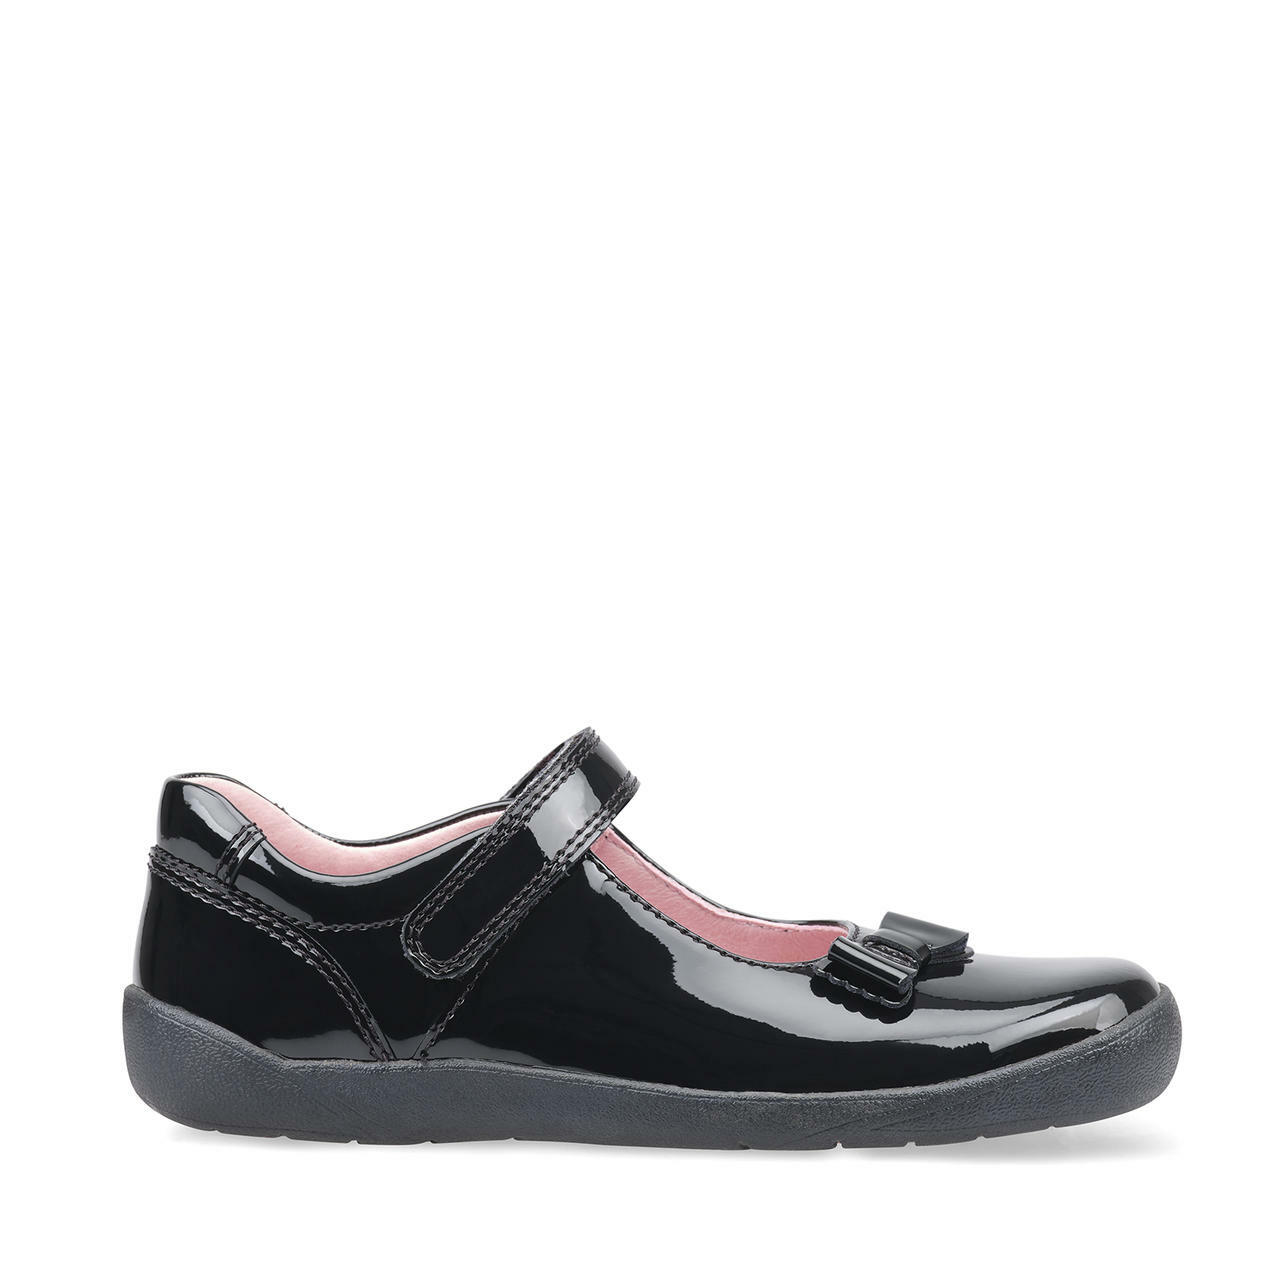 A girls Mary Jane school shoe by Start Rite, style Giggle, in black patent with velcro fastening. Right side view.